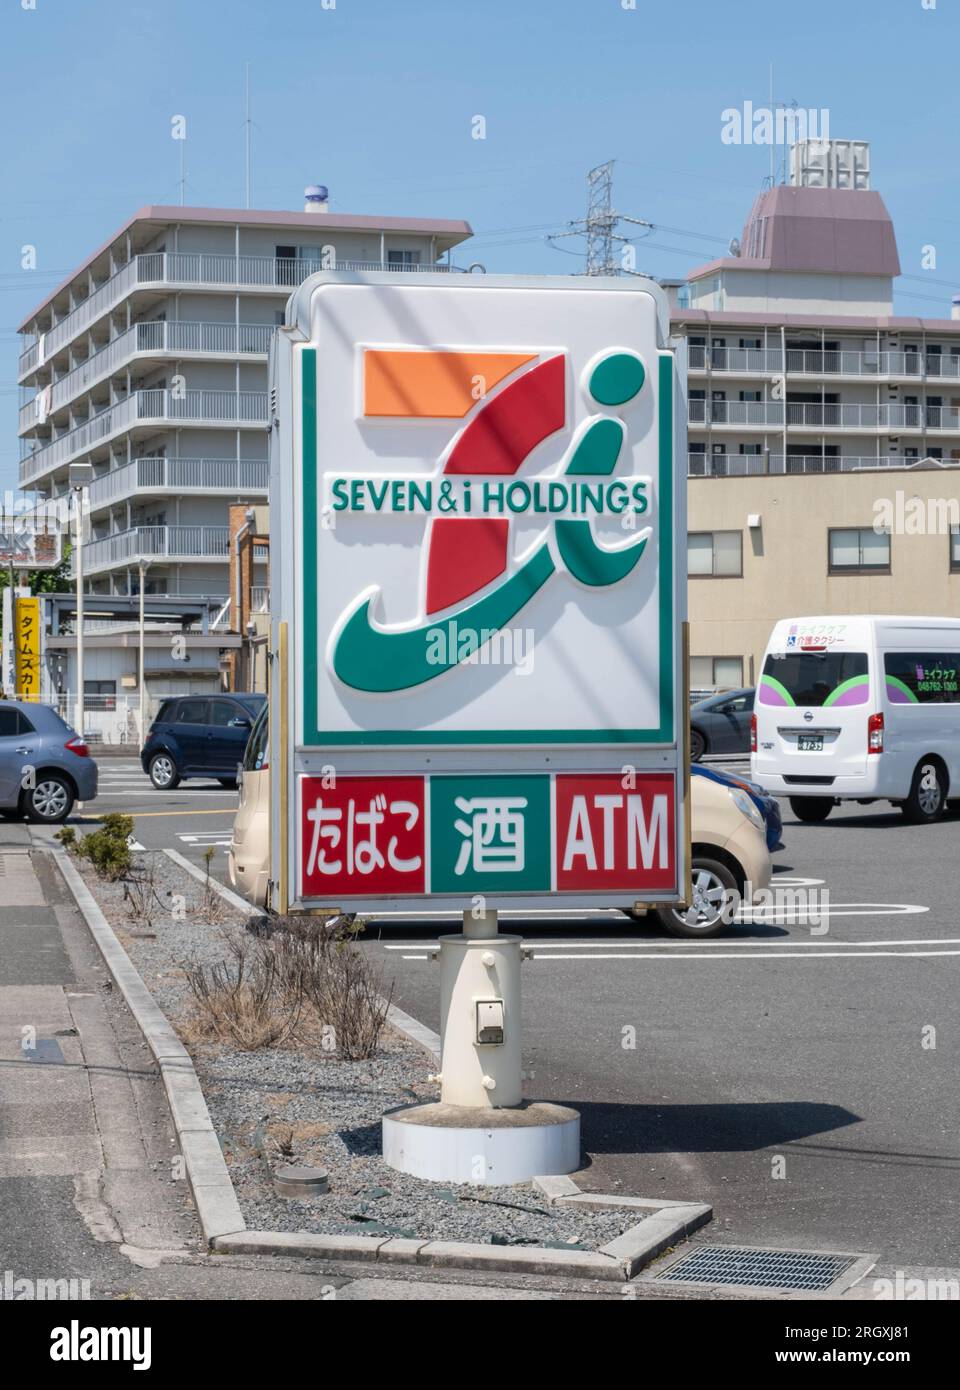 A 7-Eleven sign with 7 and i Holdings as well cigarettes, alcohol, and ATM written on the sign. Stock Photo